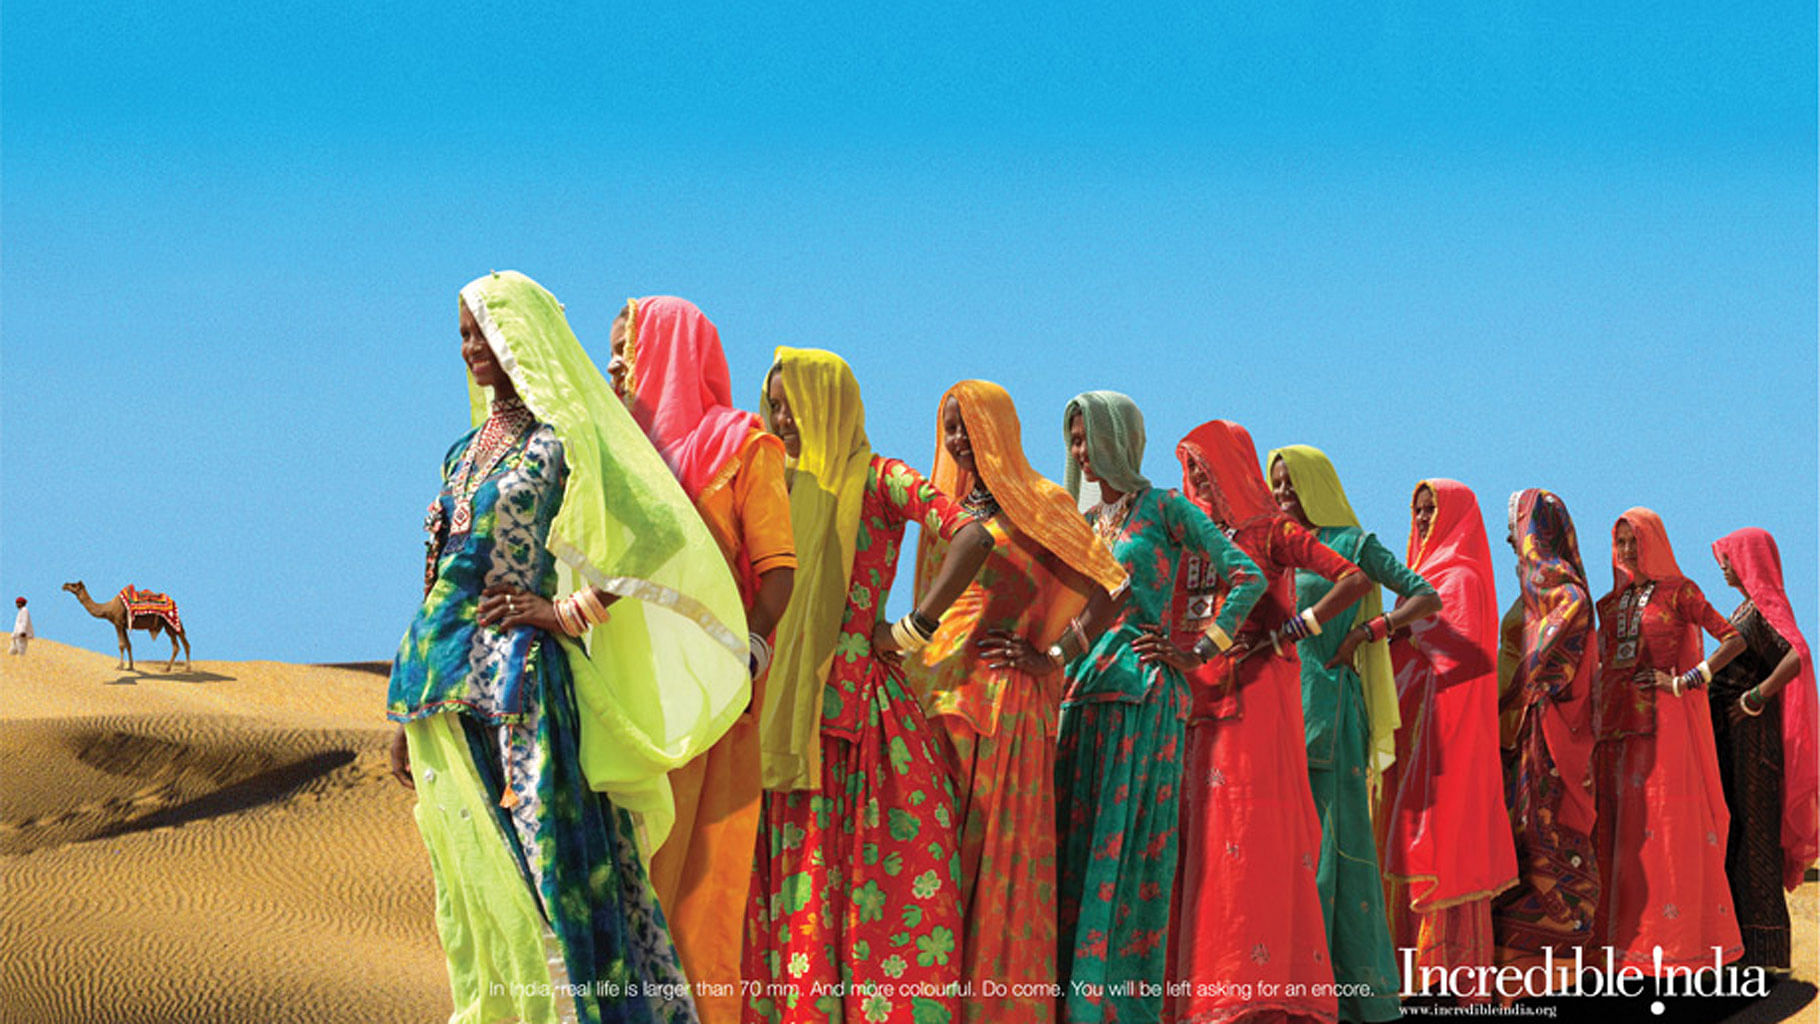 An <i>Incredible India</i> campaign. (Photo: Incredible India <a href="http://incredibleindiacampaign.com/">website</a>)